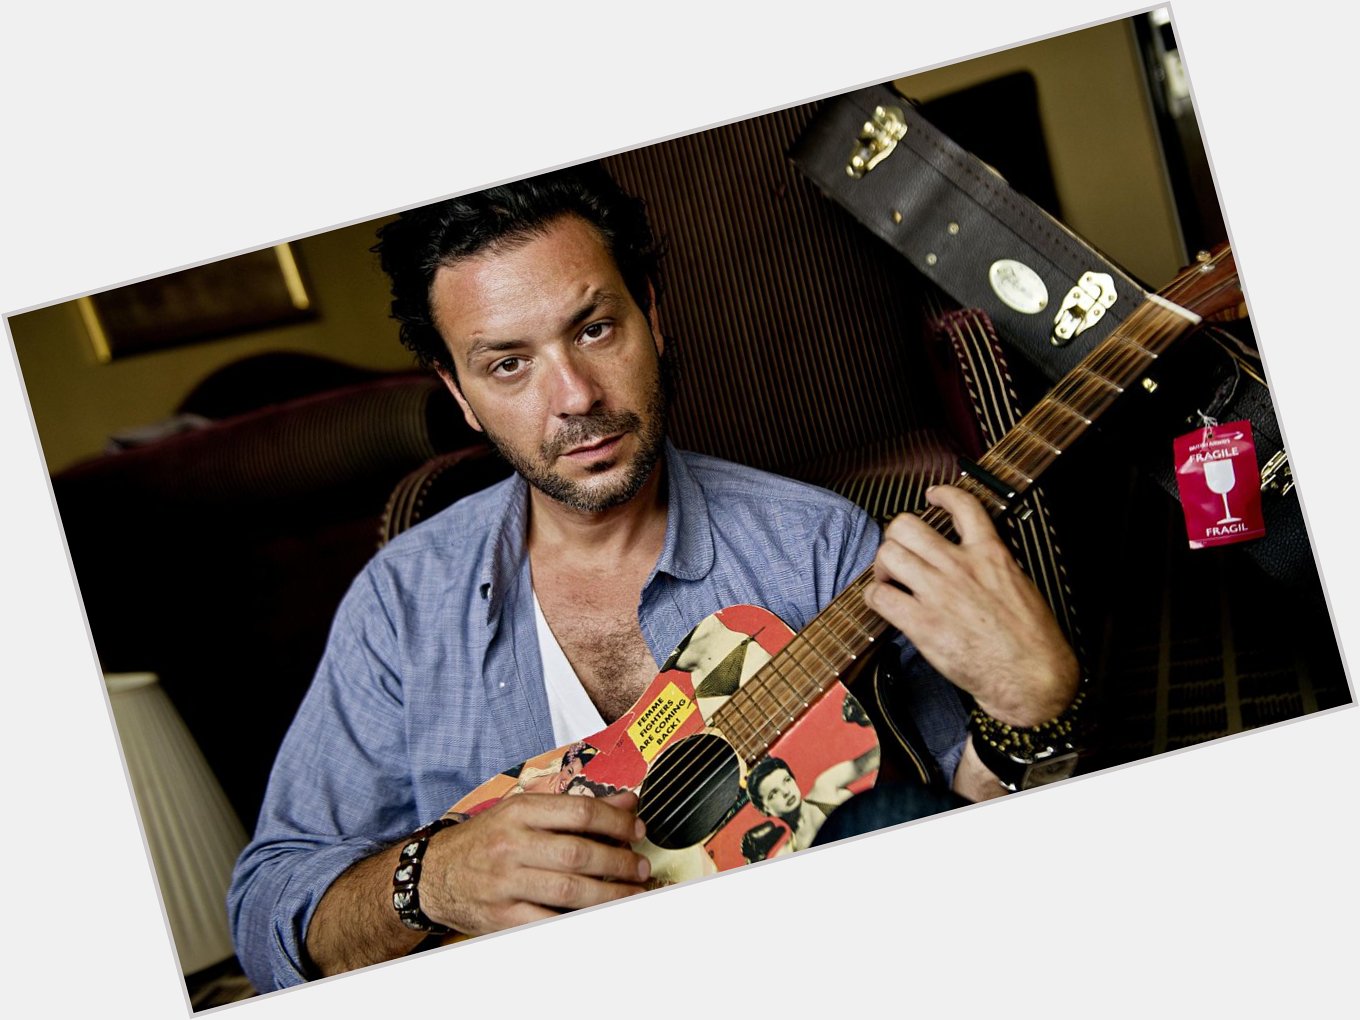 Happy Birthday to Adam Cohen! May you spend it relaxing on a beach in Greece. 